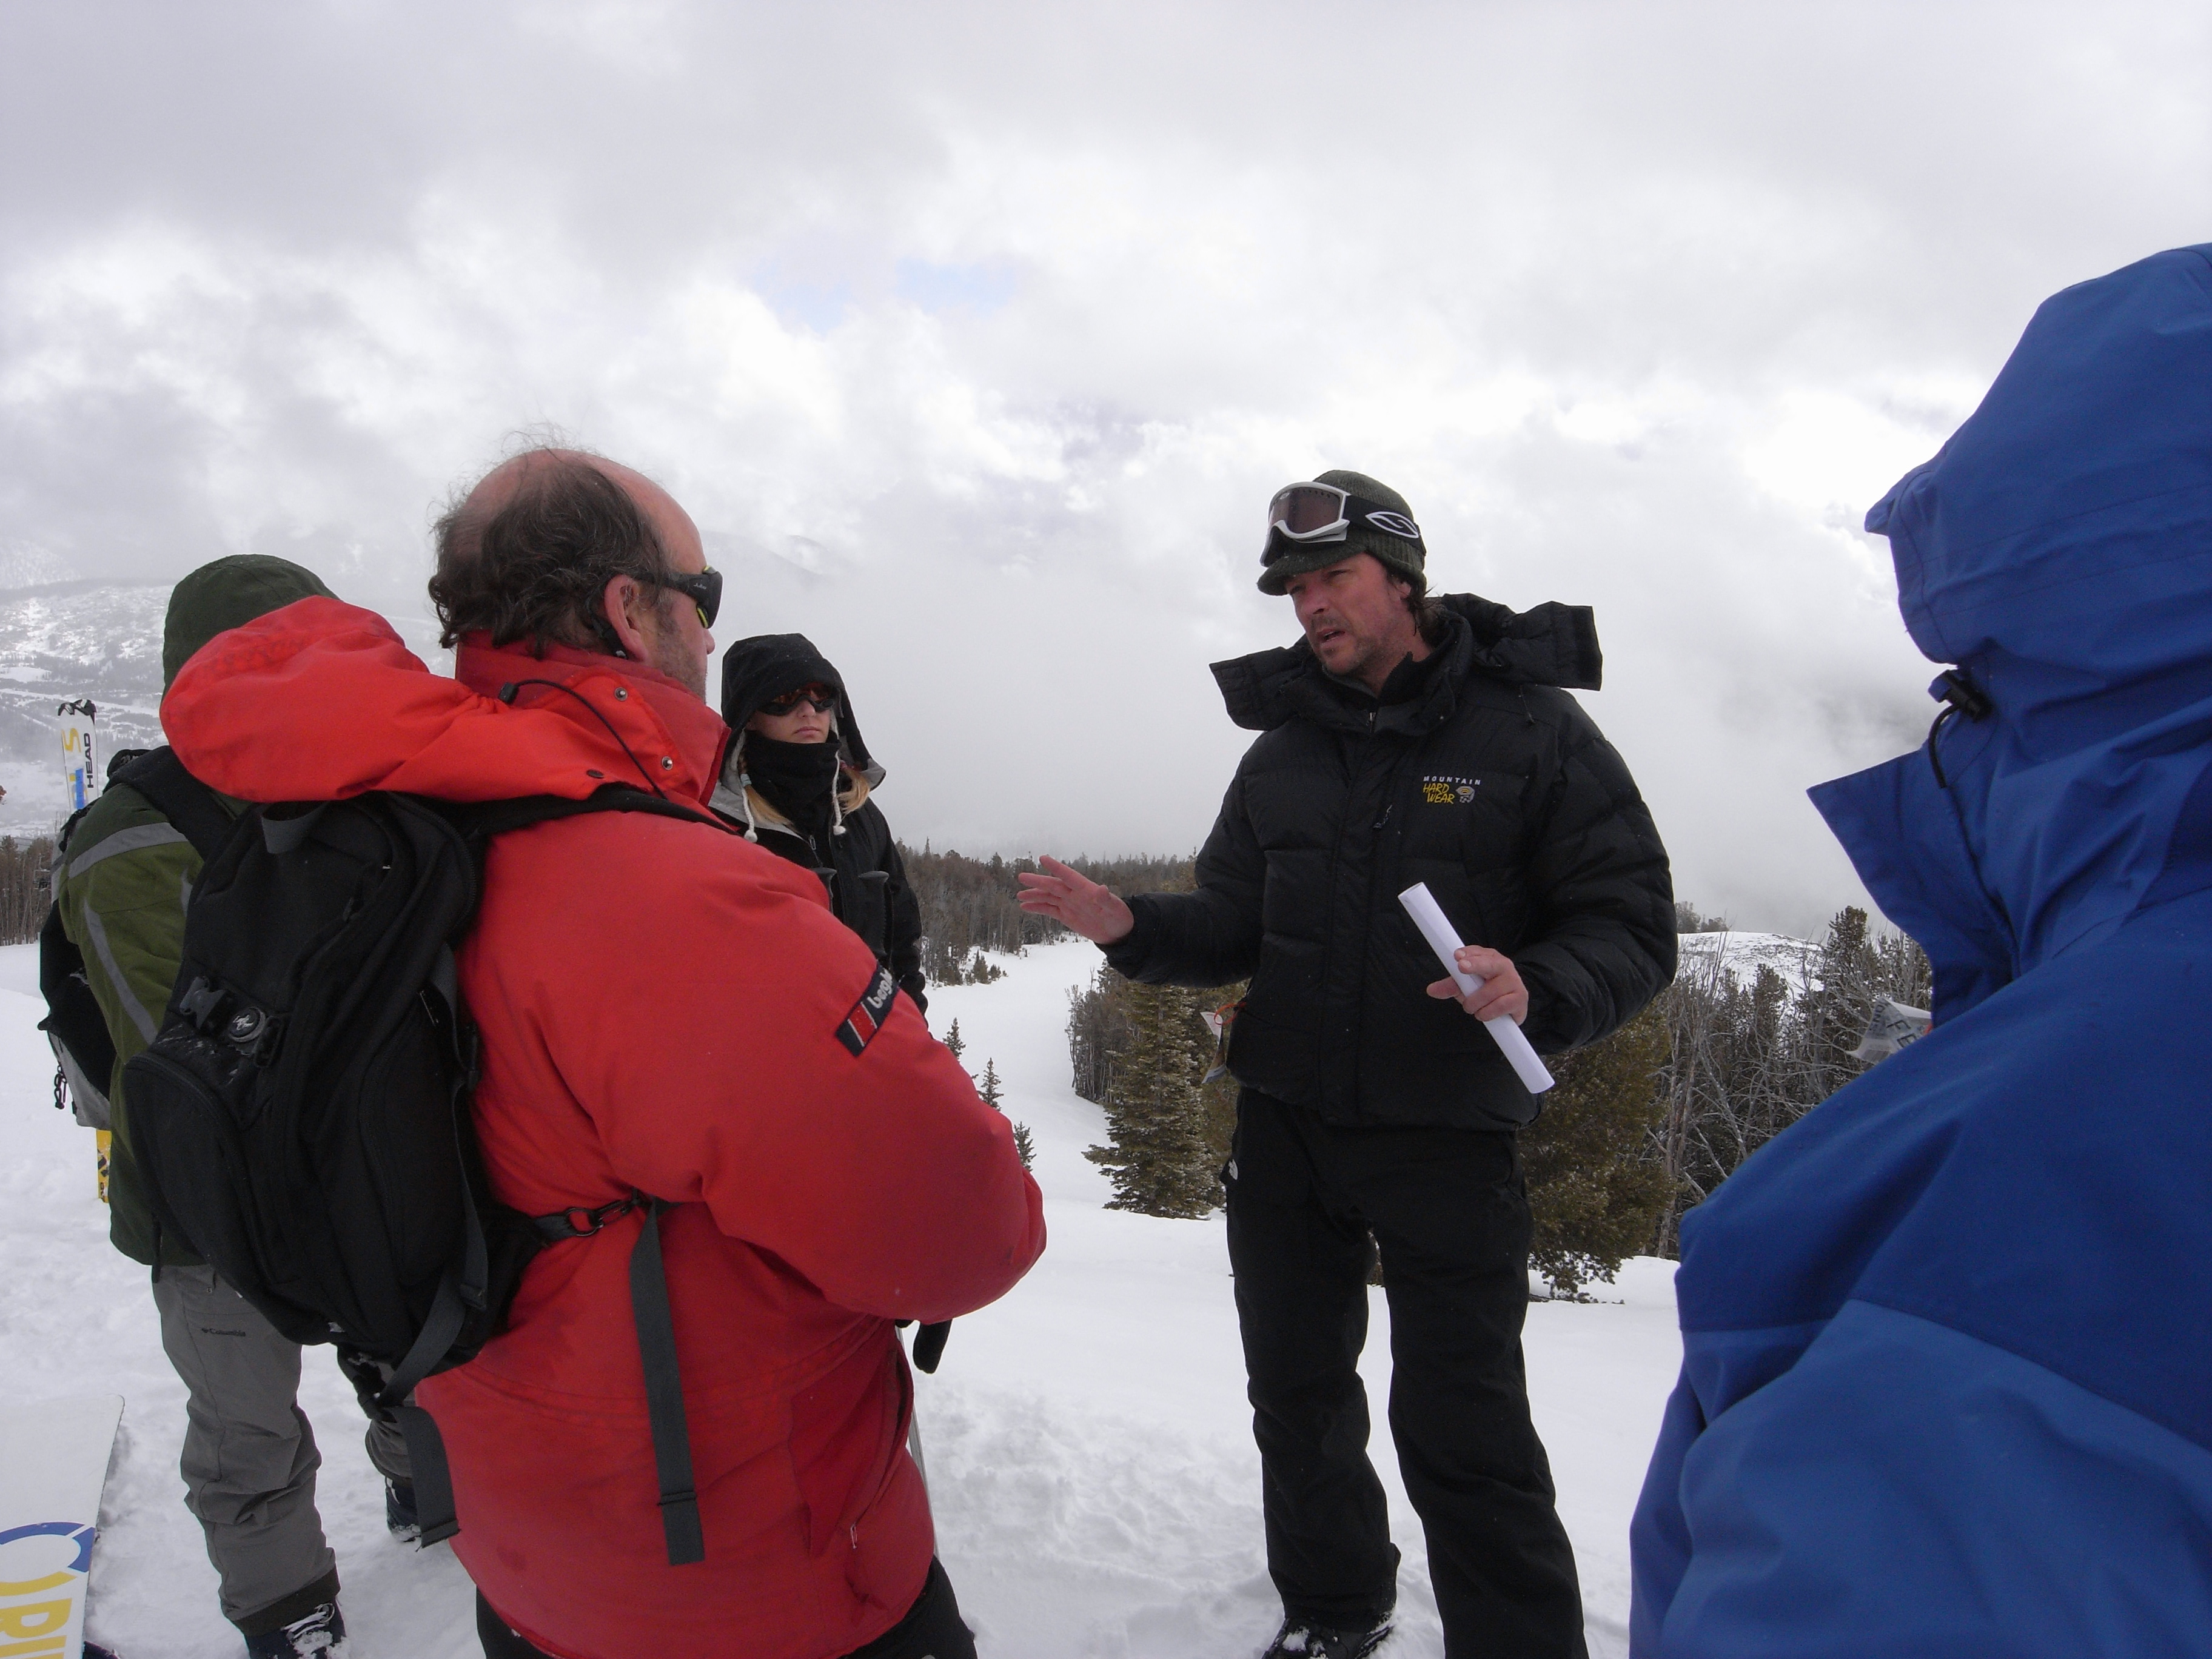 Mitch on location in Montana for Avalanche, Surviving Disasters